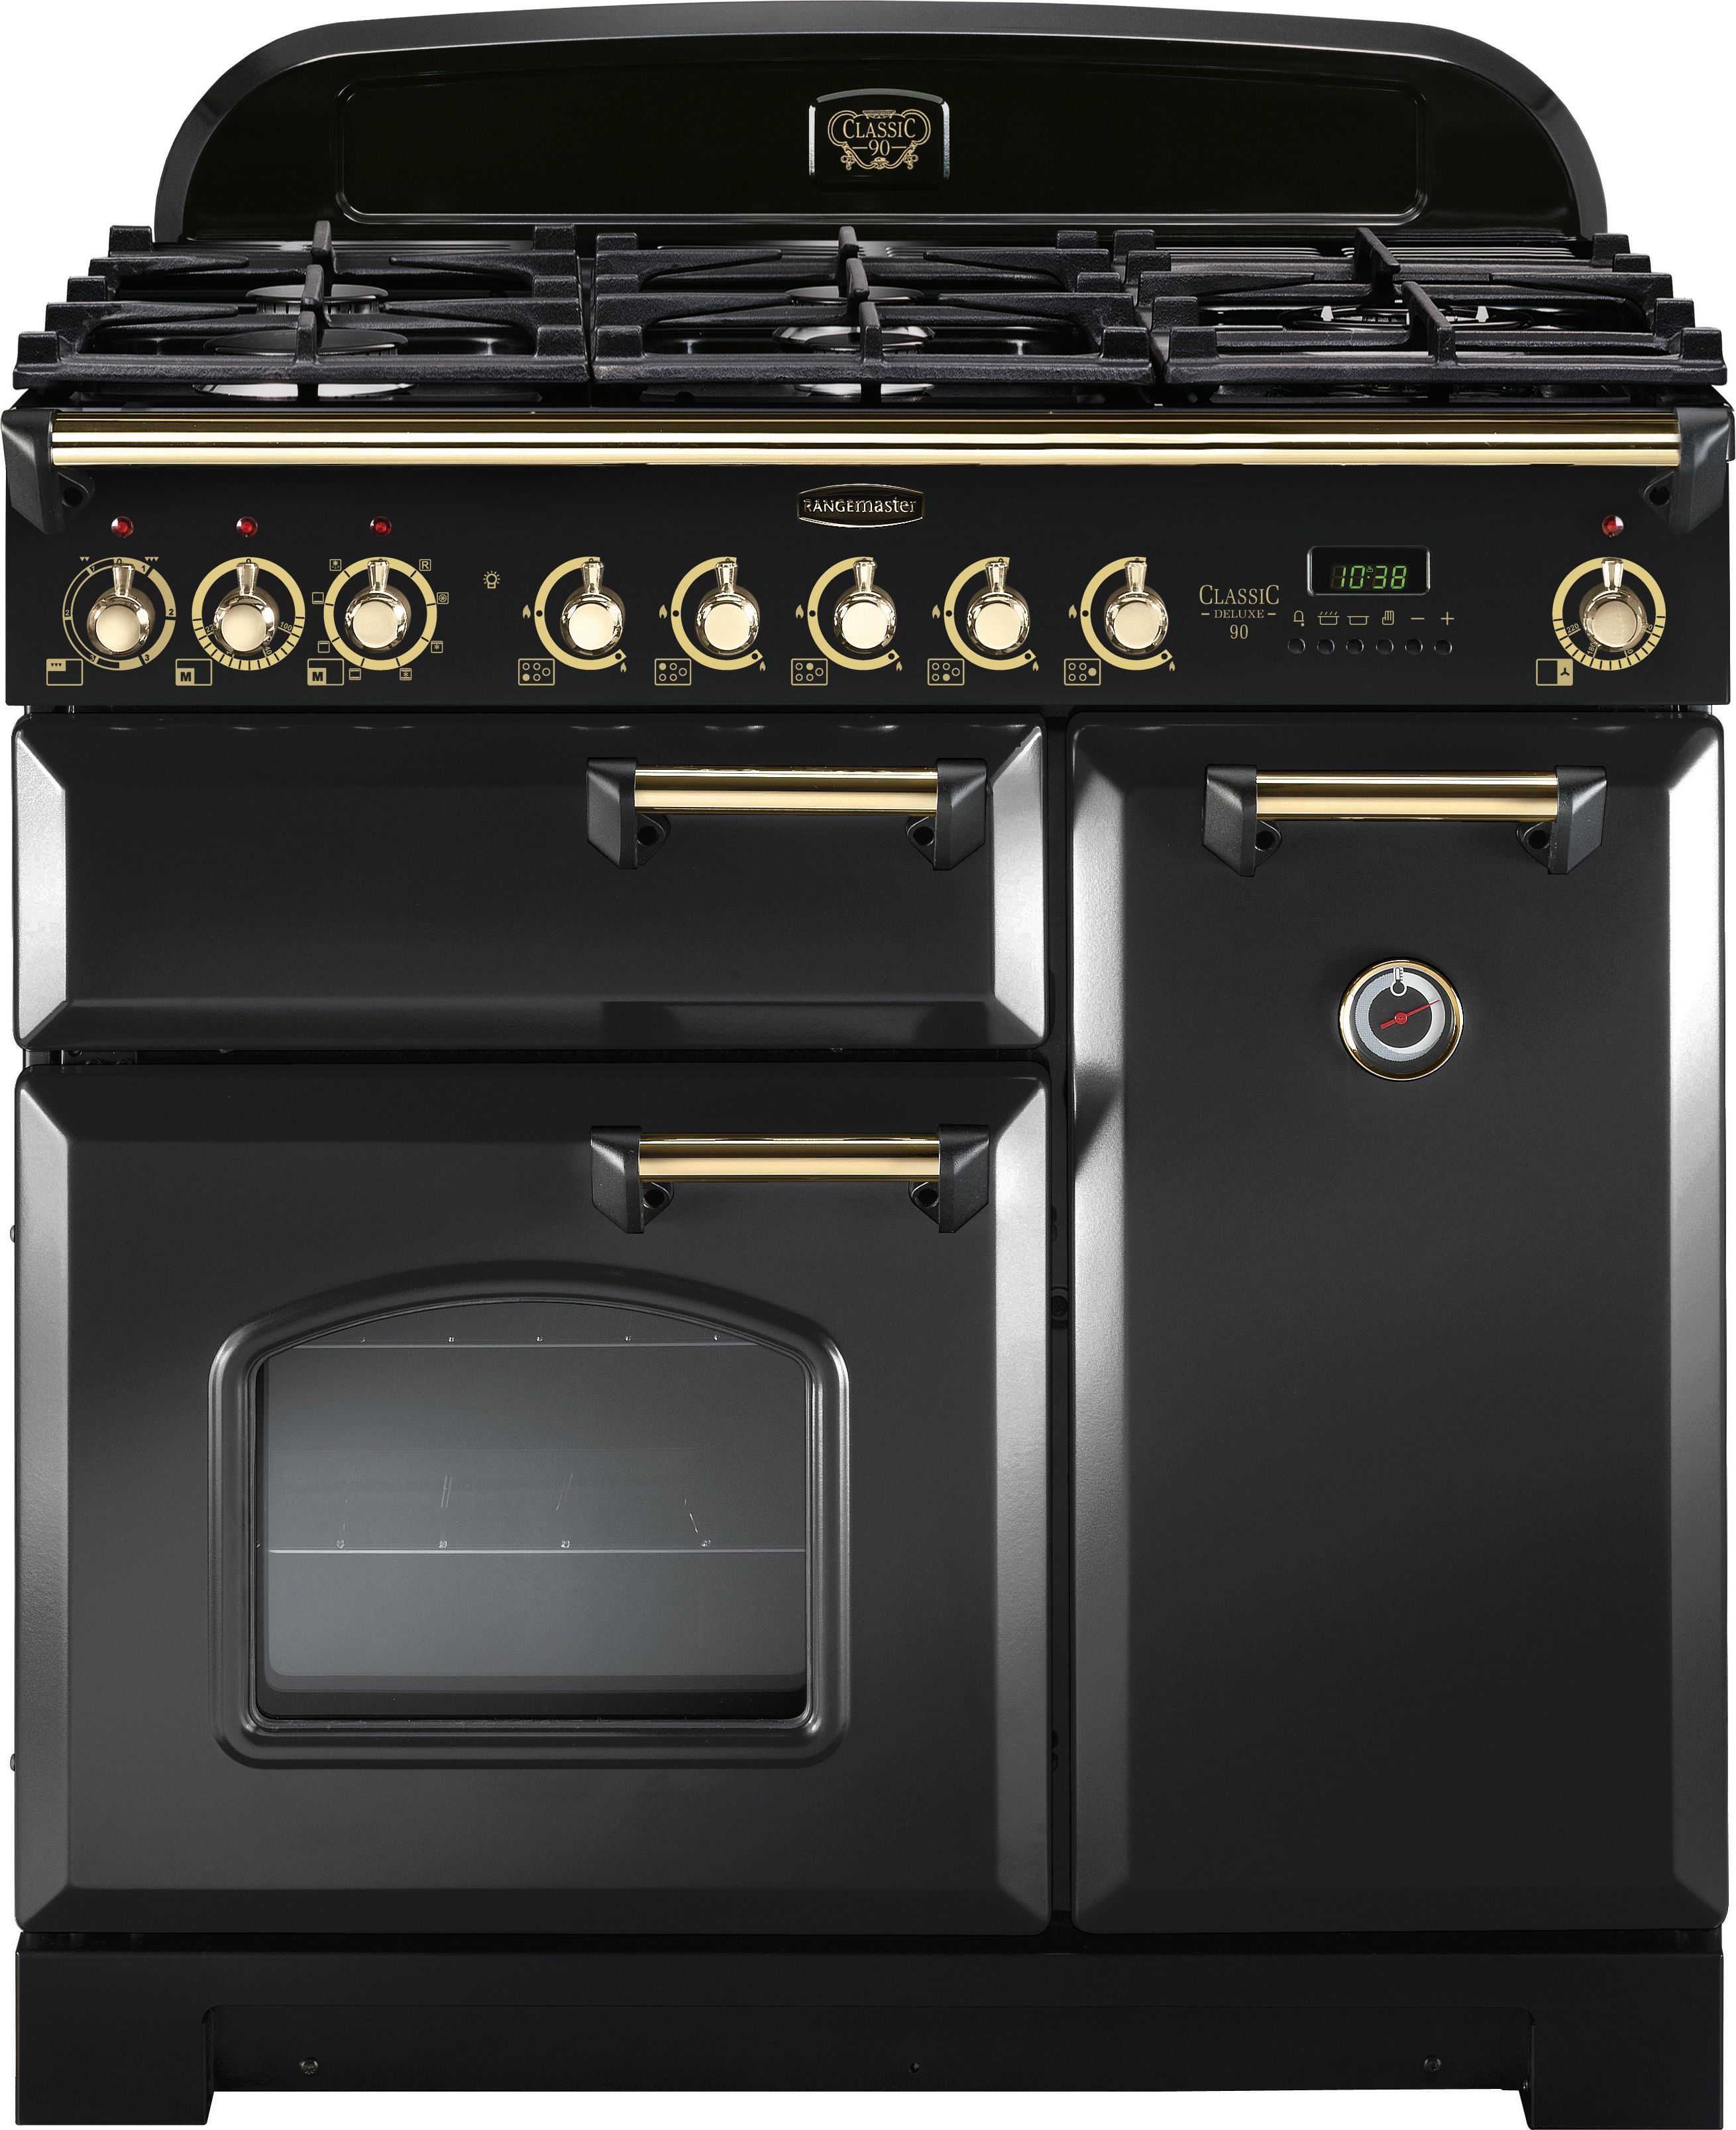 Rangemaster Classic Deluxe CDL90DFFCB/B 90cm Dual Fuel Range Cooker - Charcoal Black / Brass - A/A Rated, Black